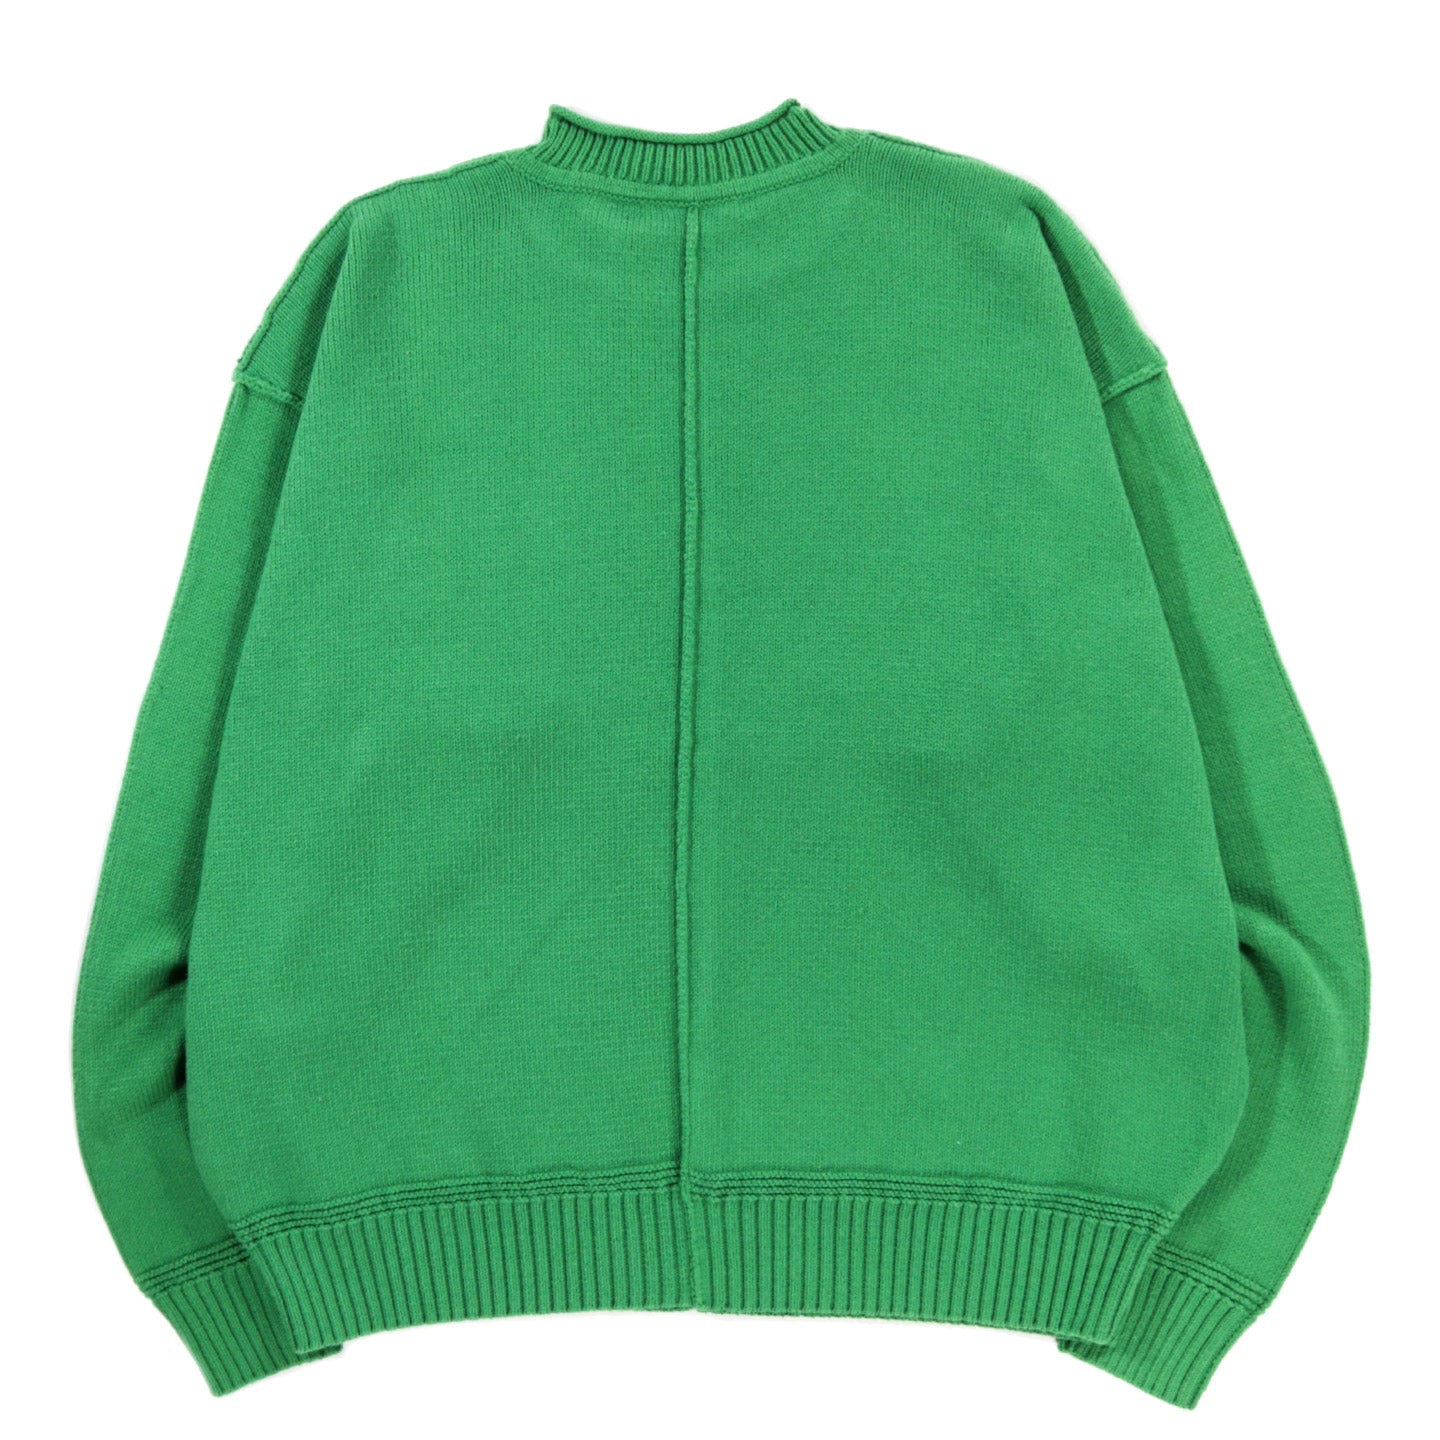 S.K. MANOR HILL WHARF SWEATER KELLY GREEN COTTON